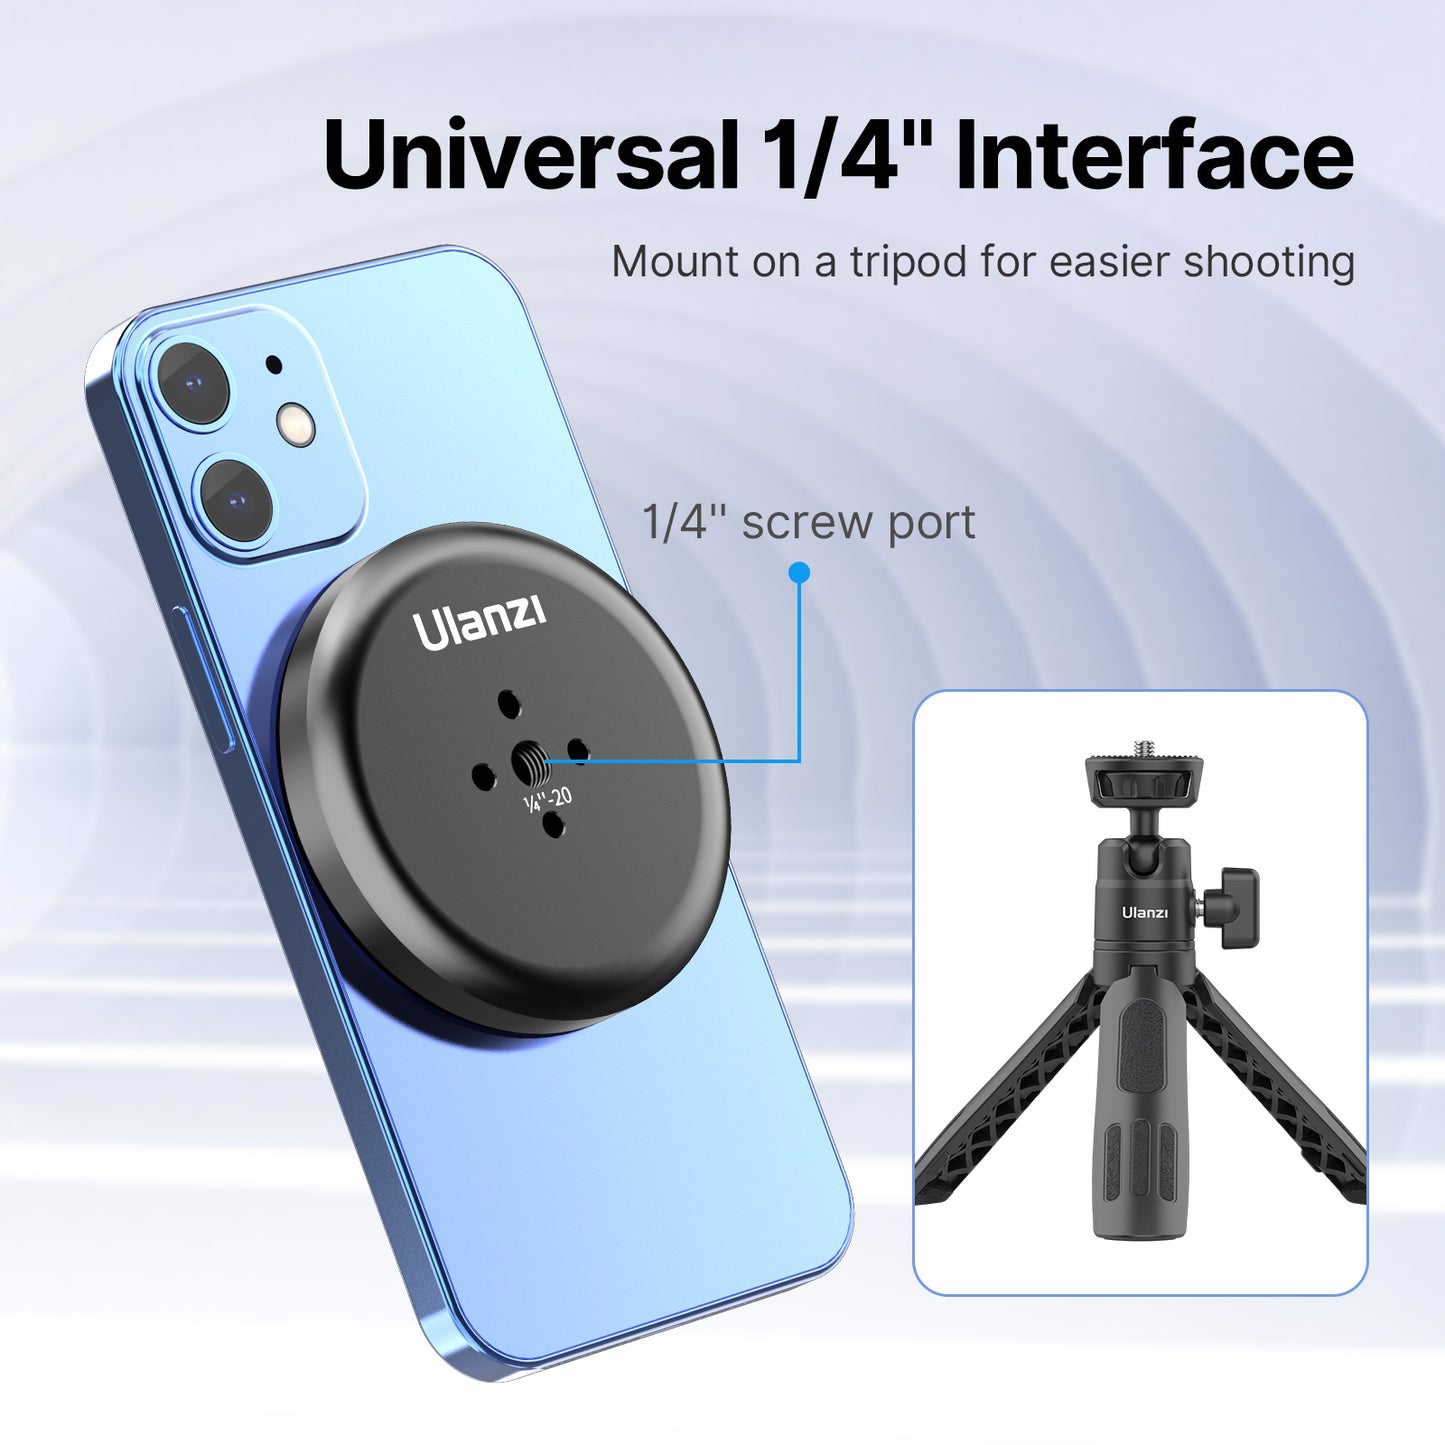 Ulanzi U-R101 magnetic Magsafe mount for tripod – With 1/4 inch screw hole